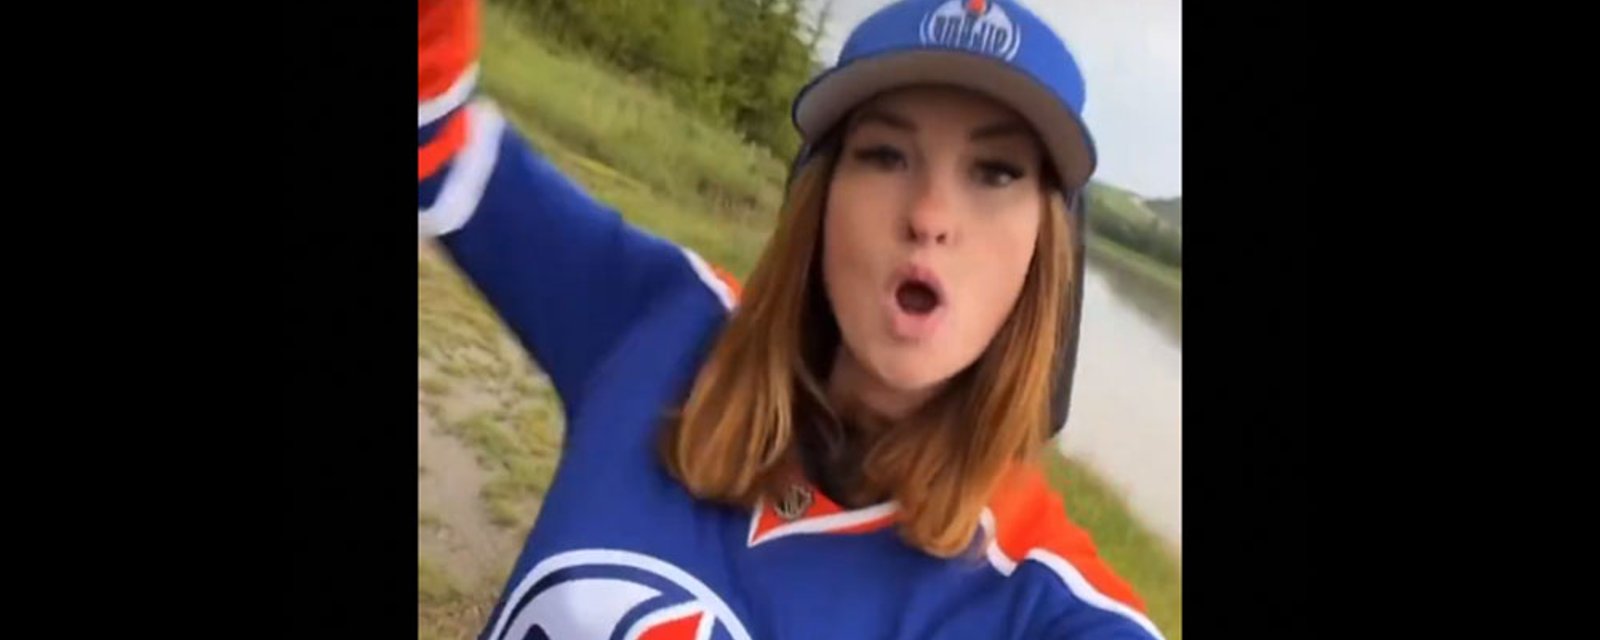 “Oilers Girl” goes viral with a new video posted on social media